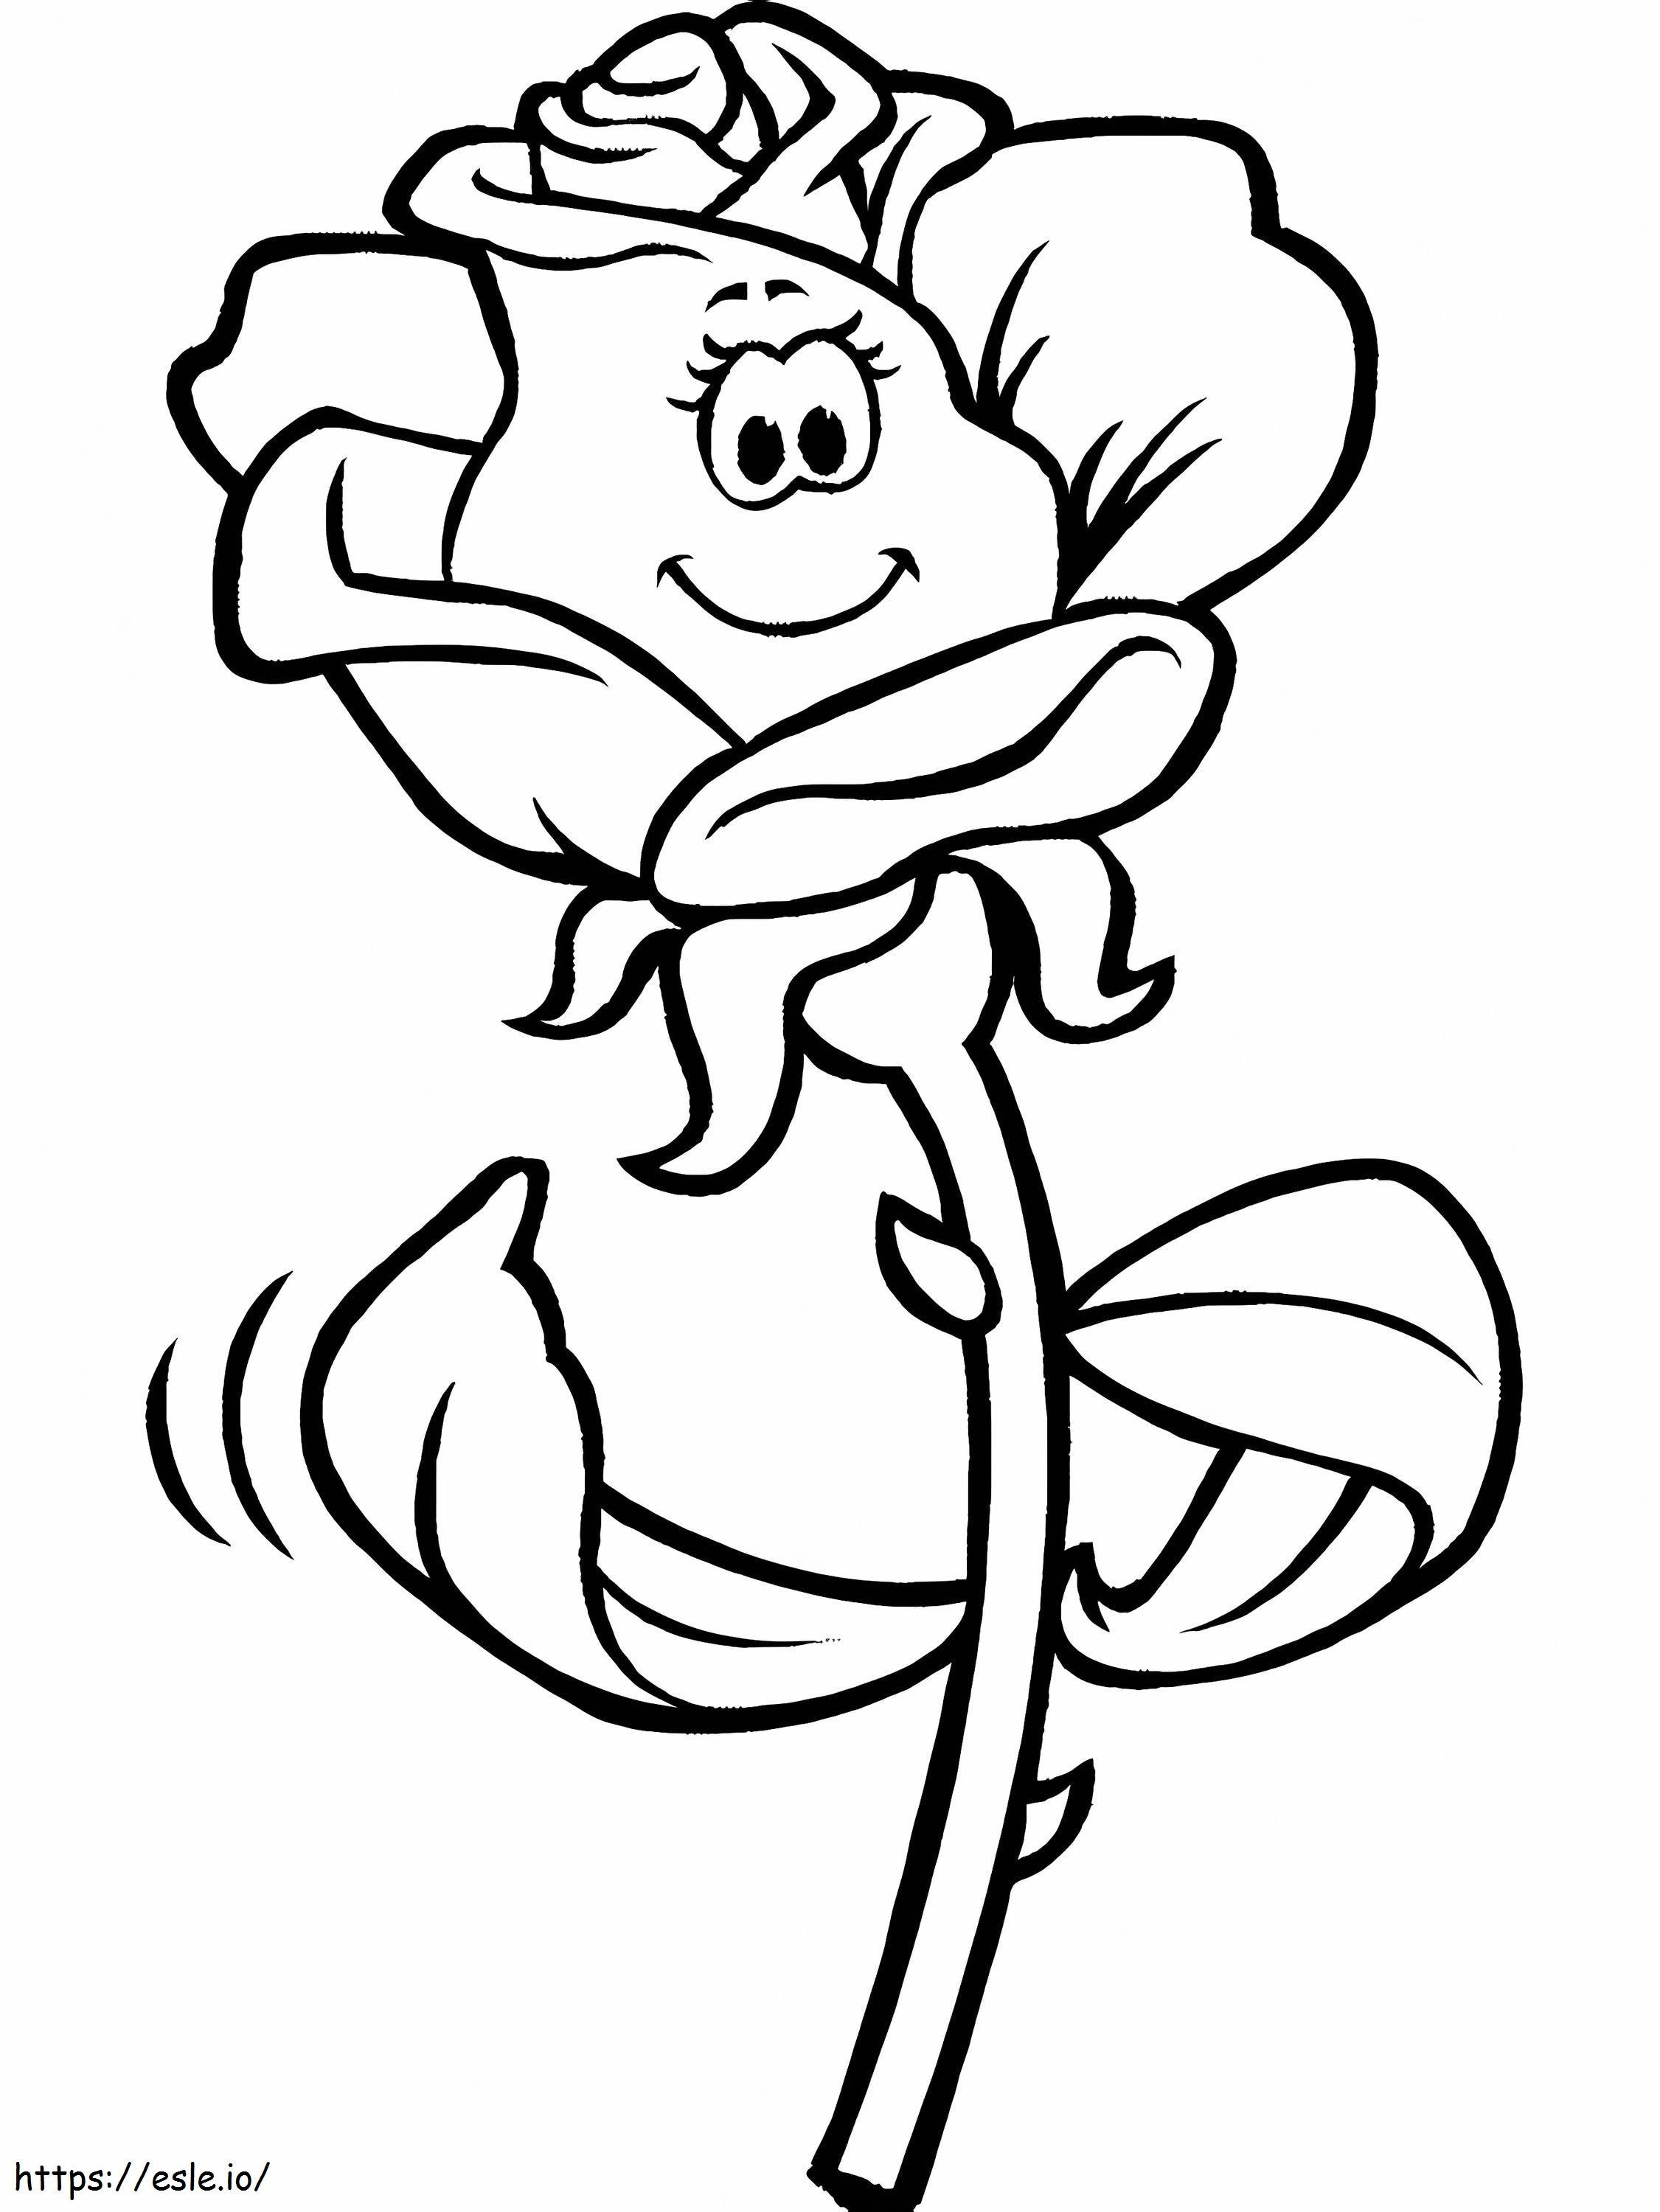 1532141755 Cartoon Rose A4 coloring page